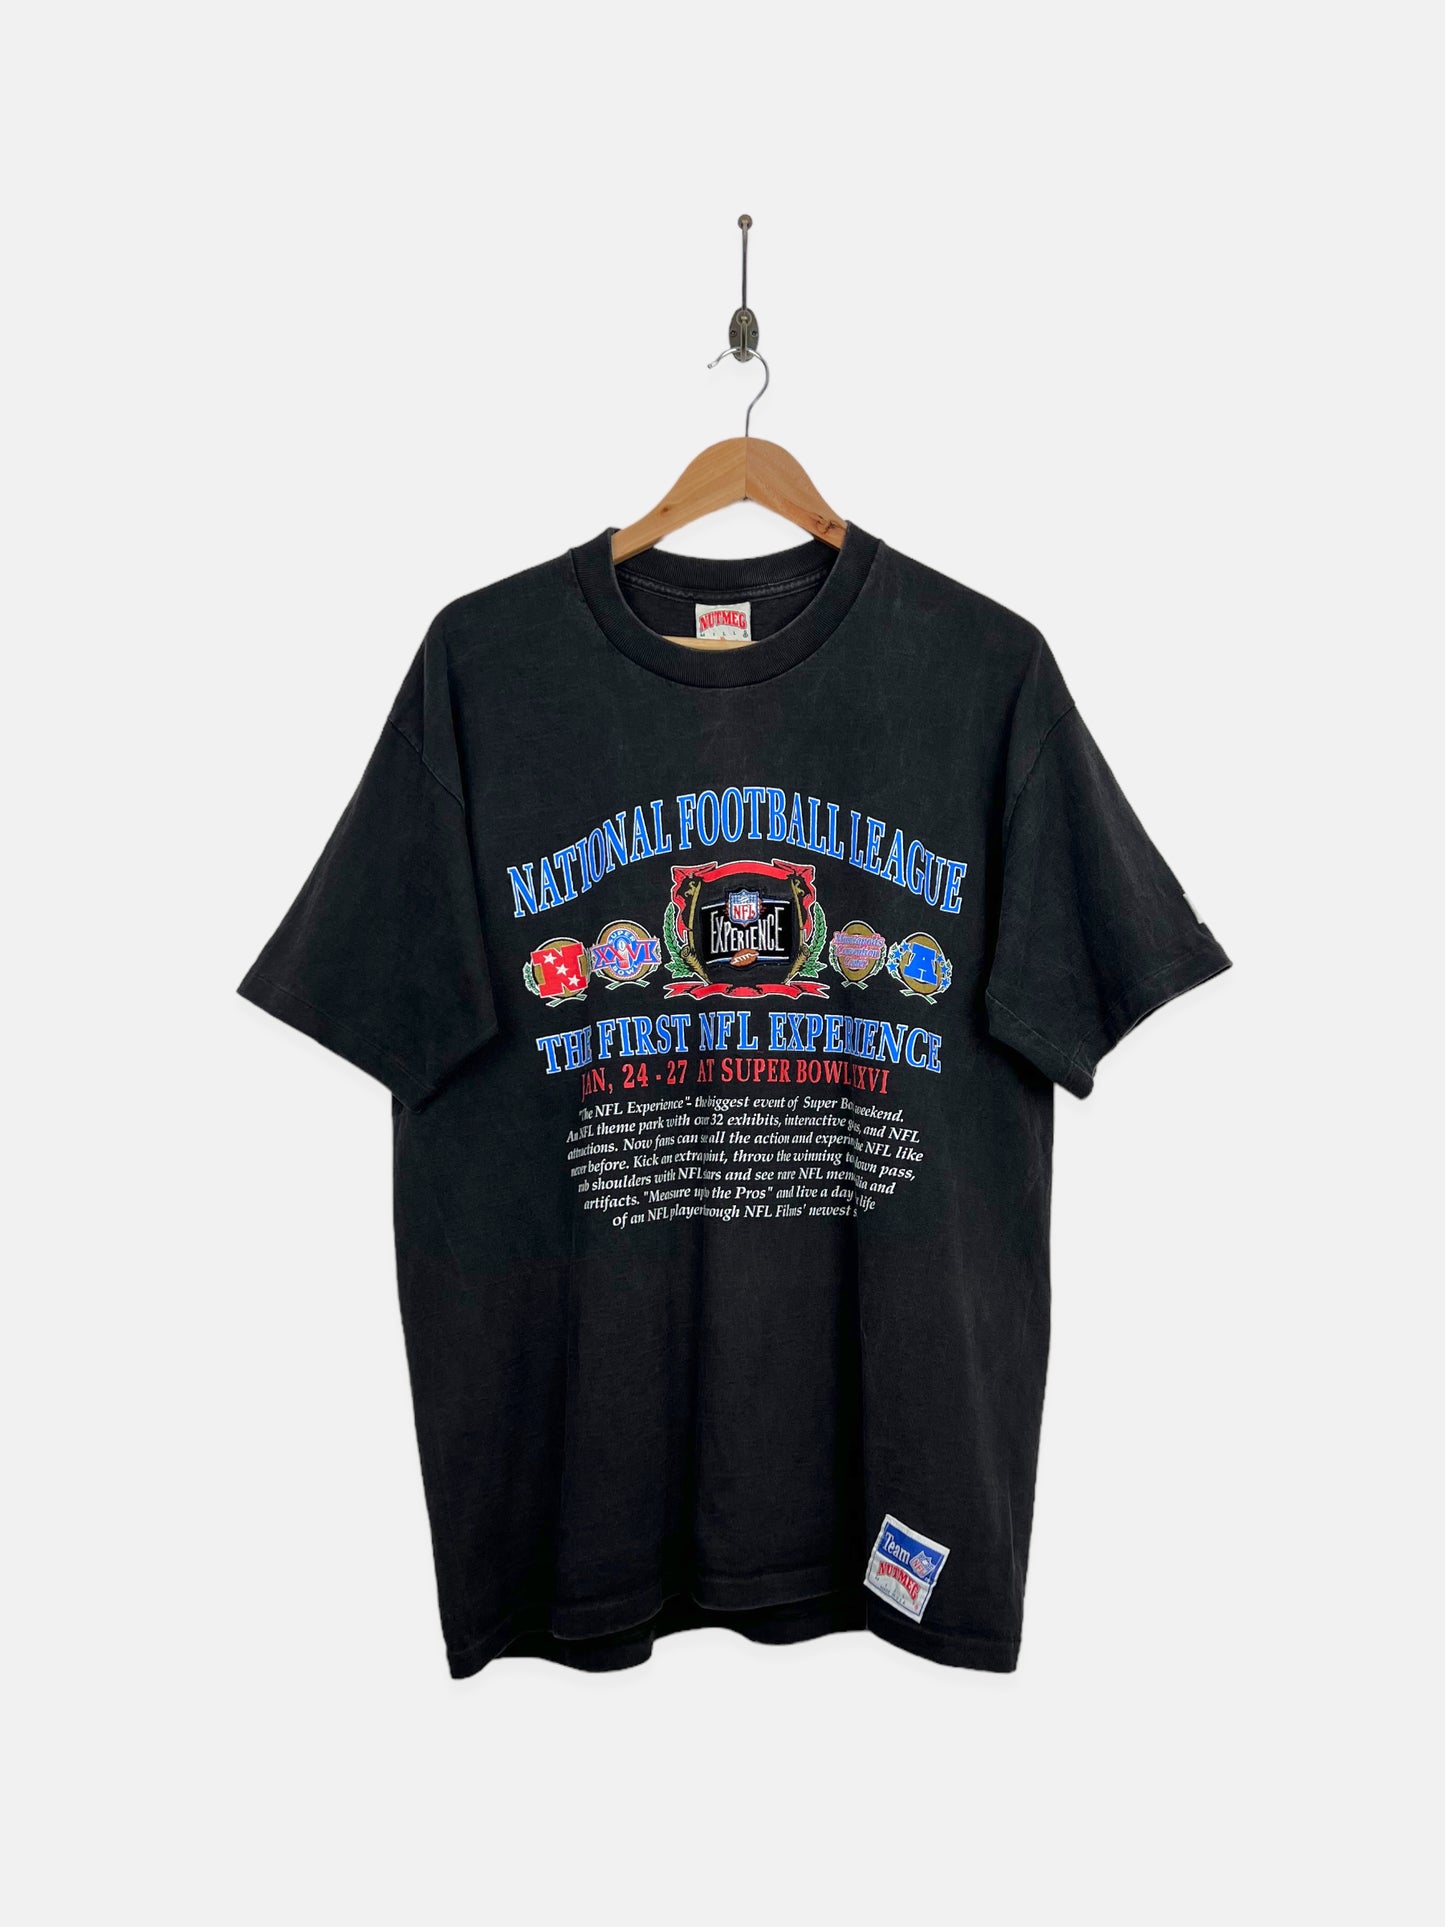 1992 NFL Super Bowl Experience USA Made Vintage T-Shirt Size XL